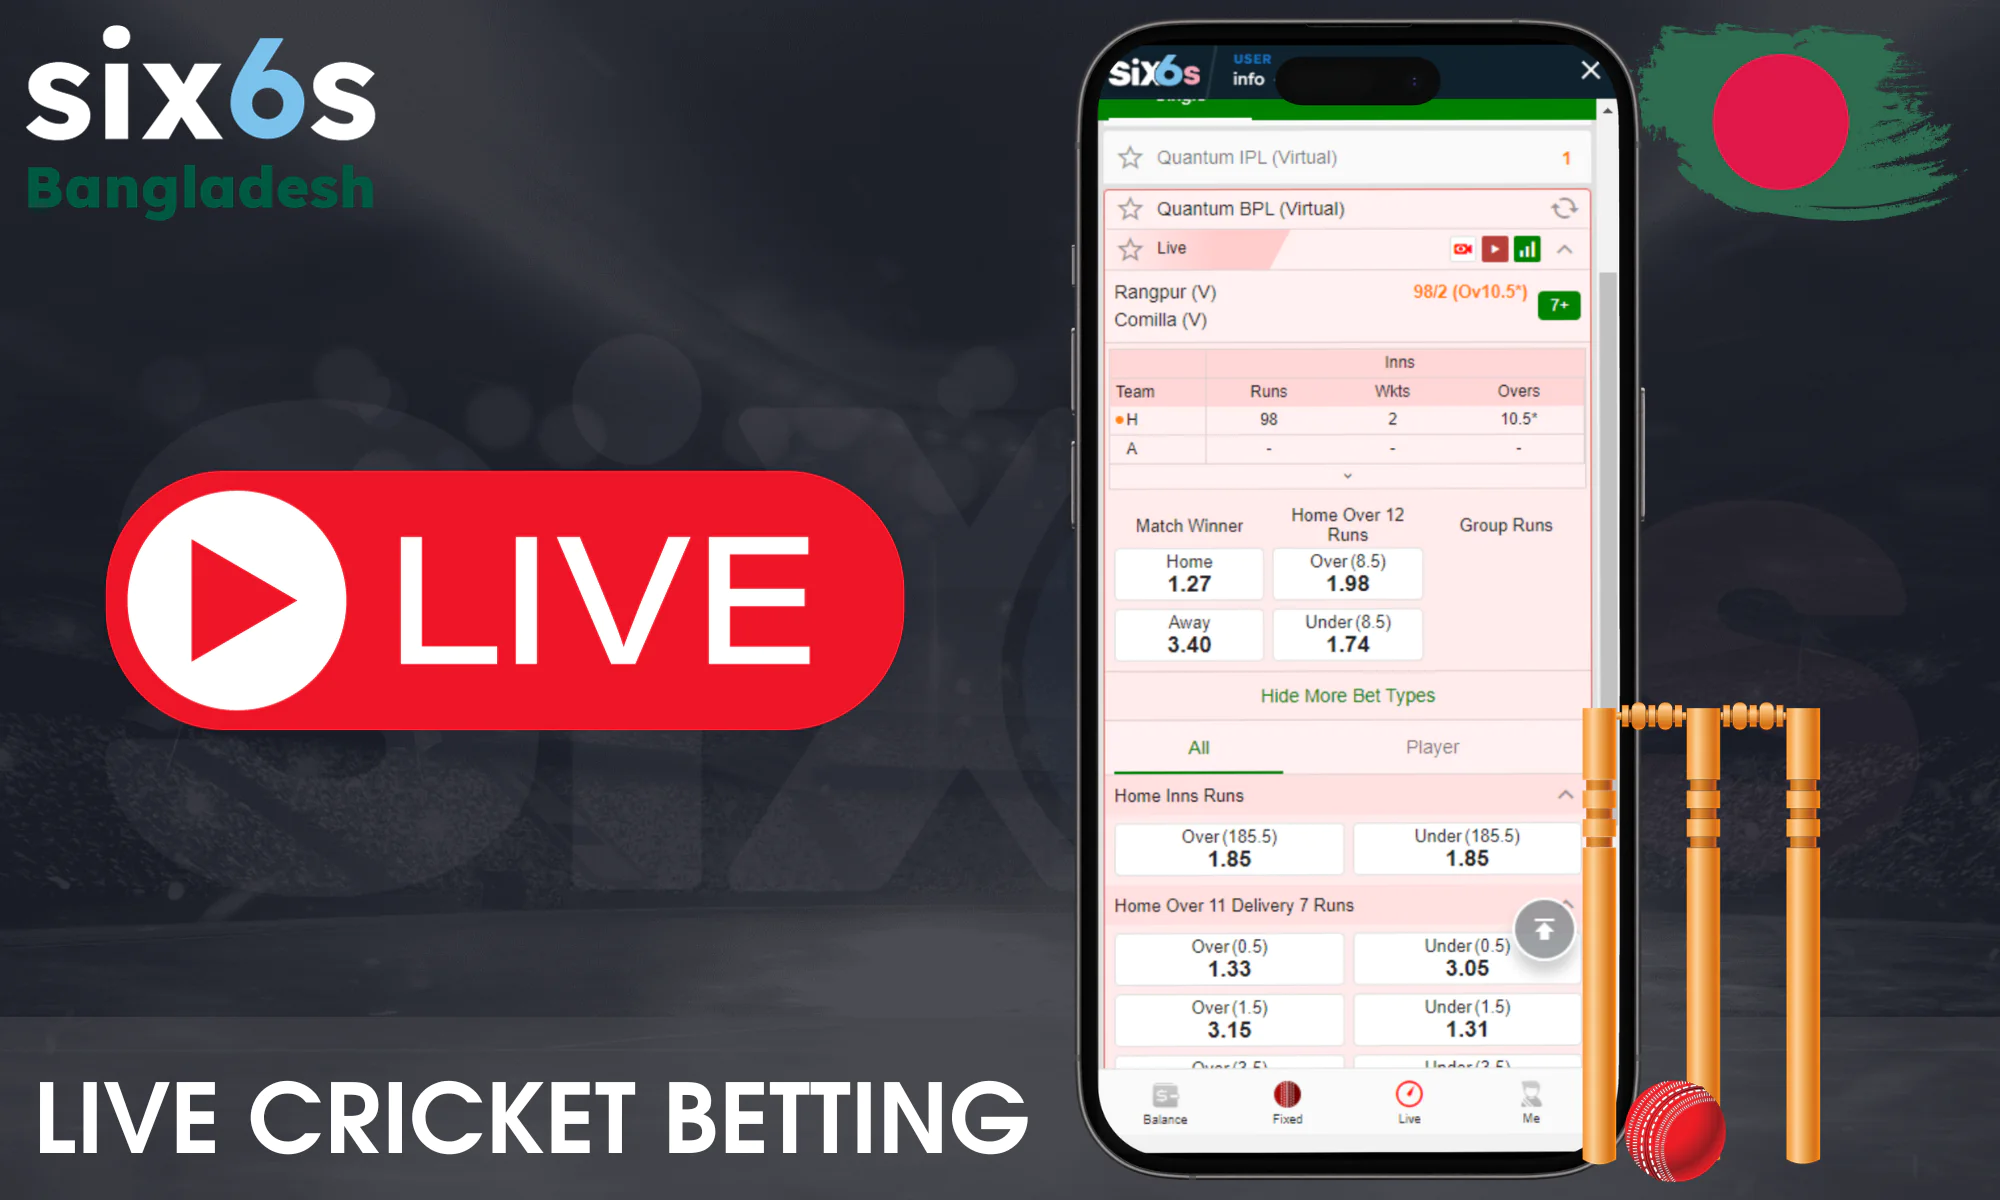 Six6s offers the opportunity to bet on live cricket